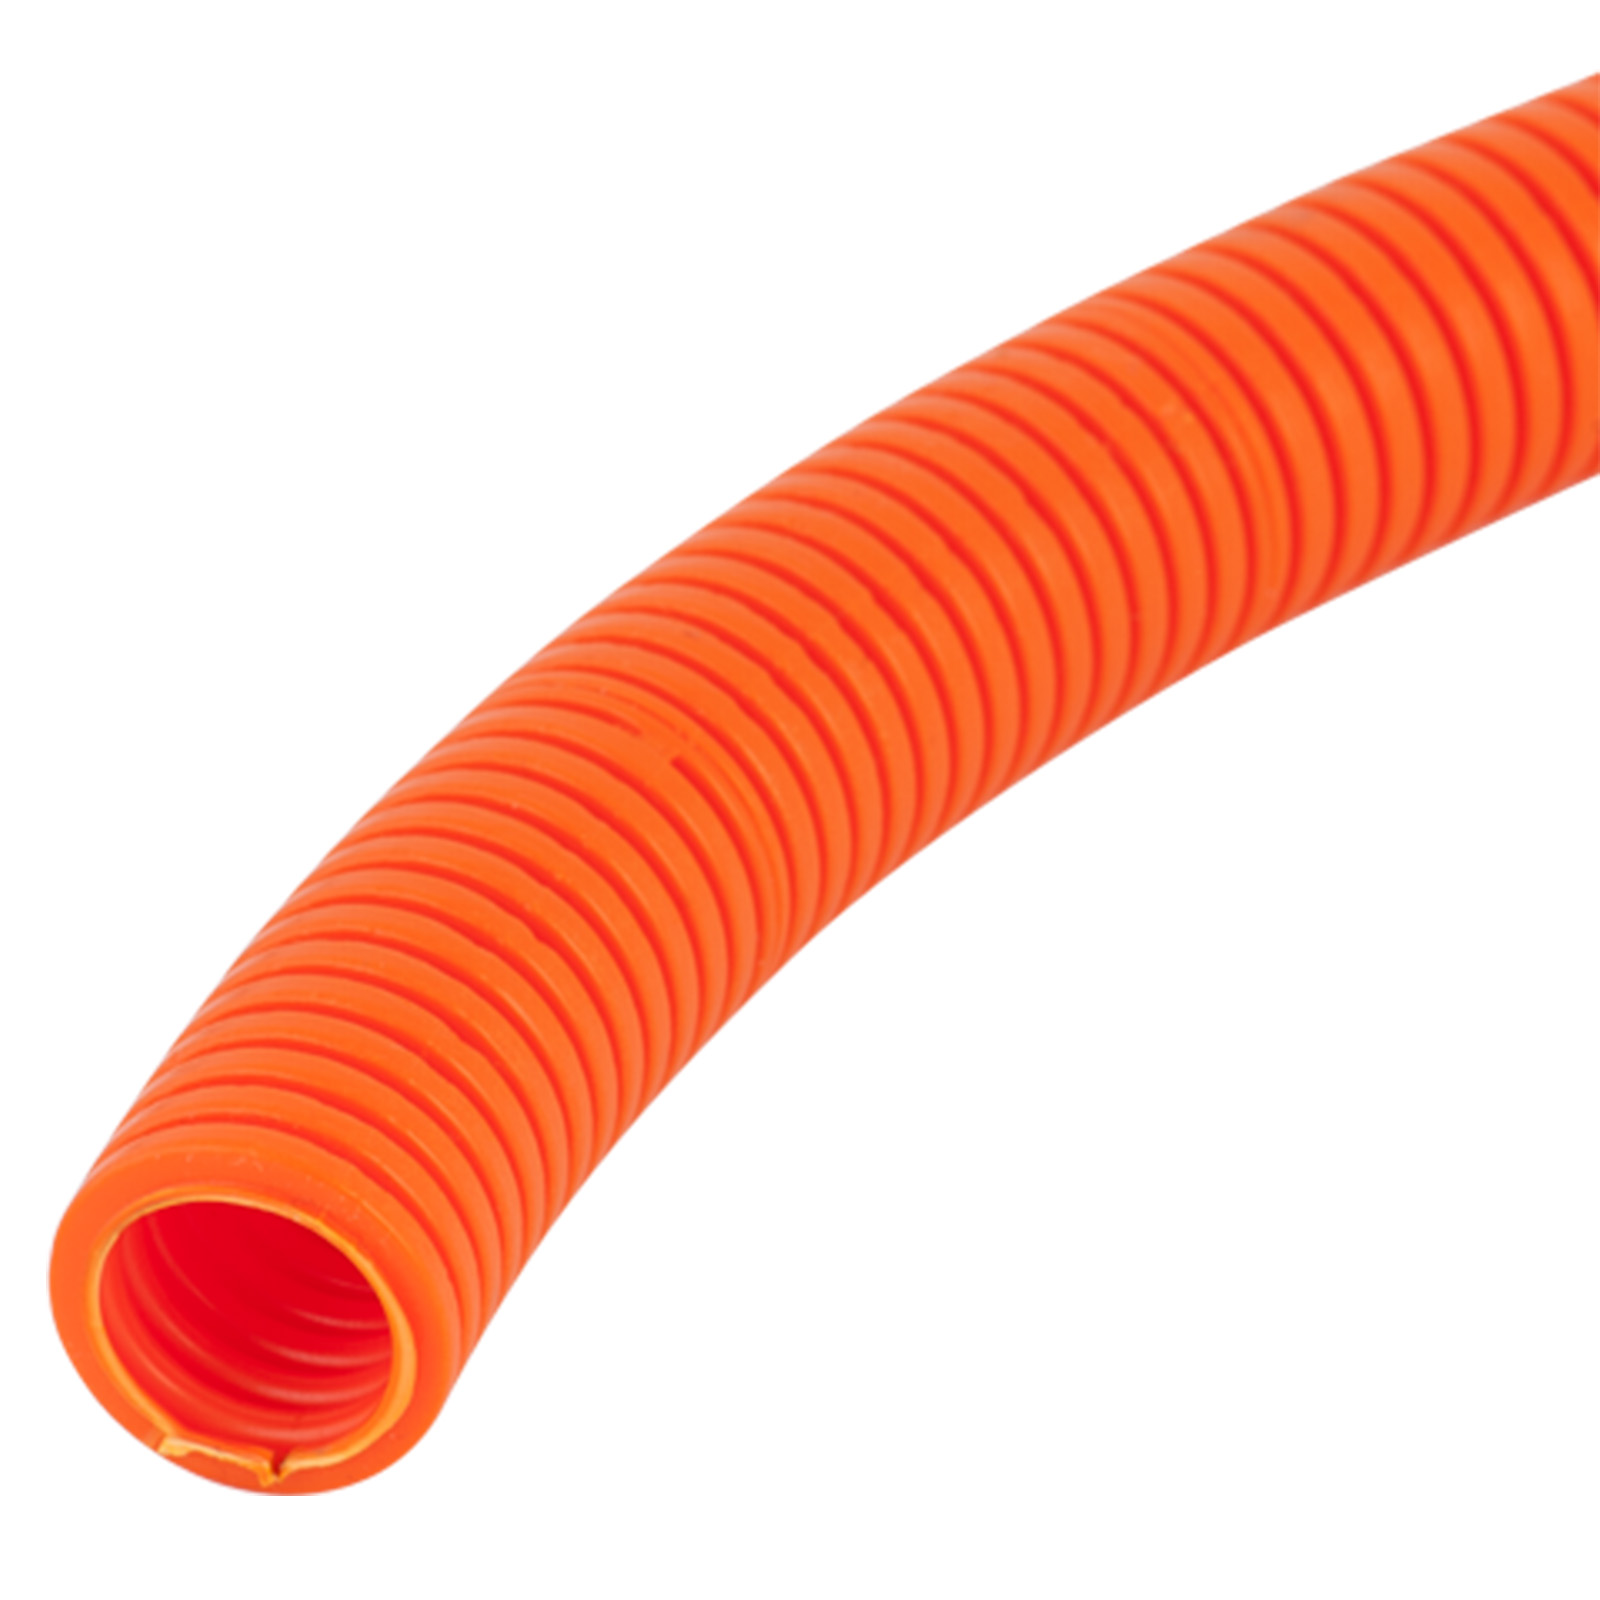 What is Corrugated Conduit?